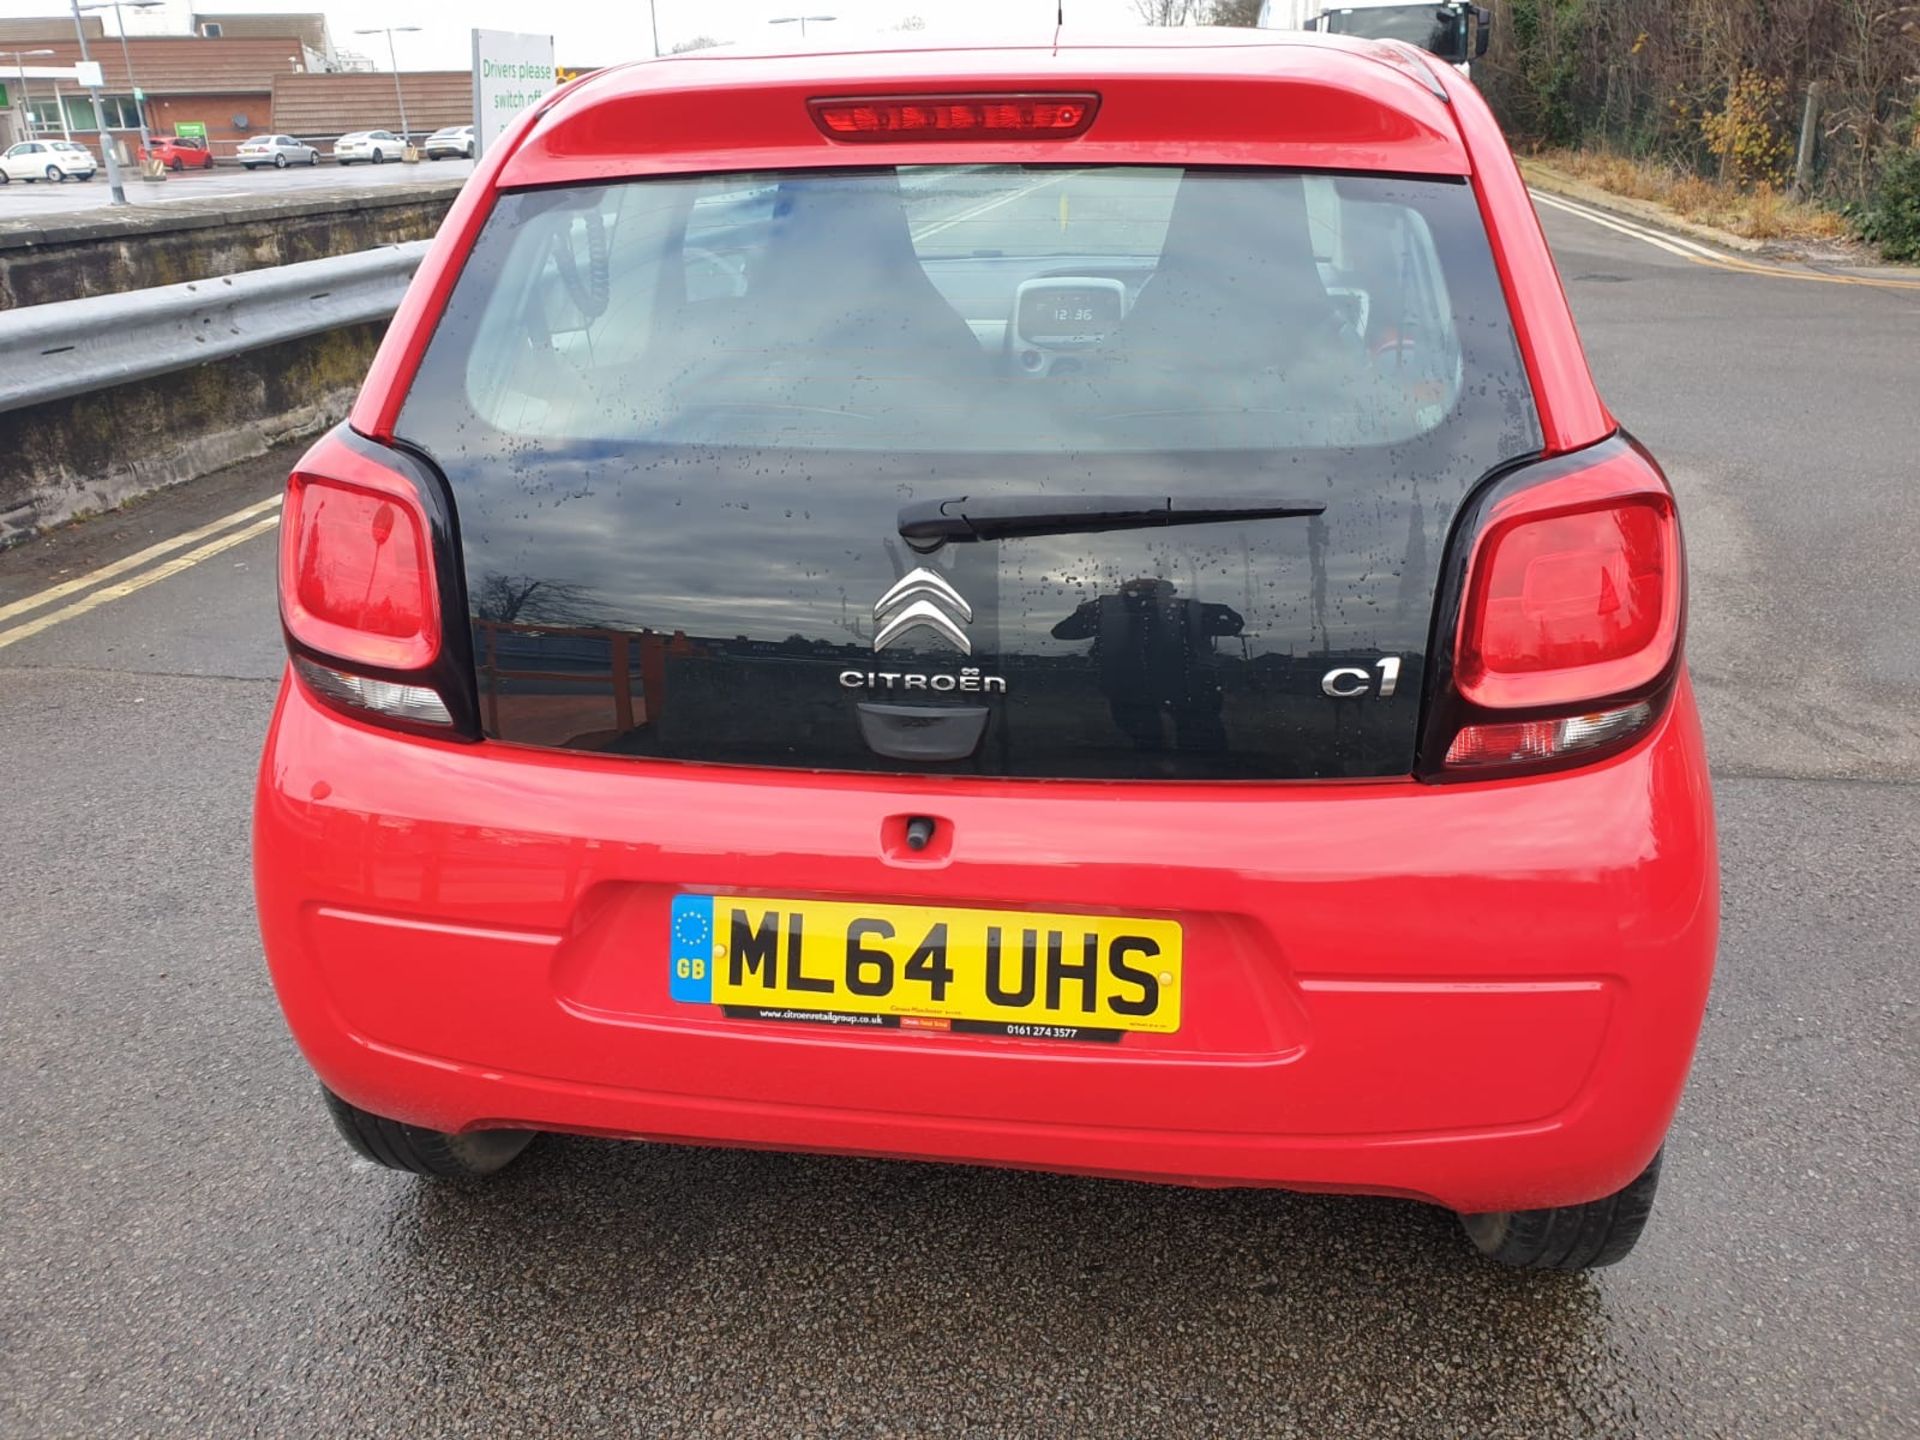 CITROEN C1 FEEL ML64 UHS COLLECTION LEICESTER - Image 2 of 10